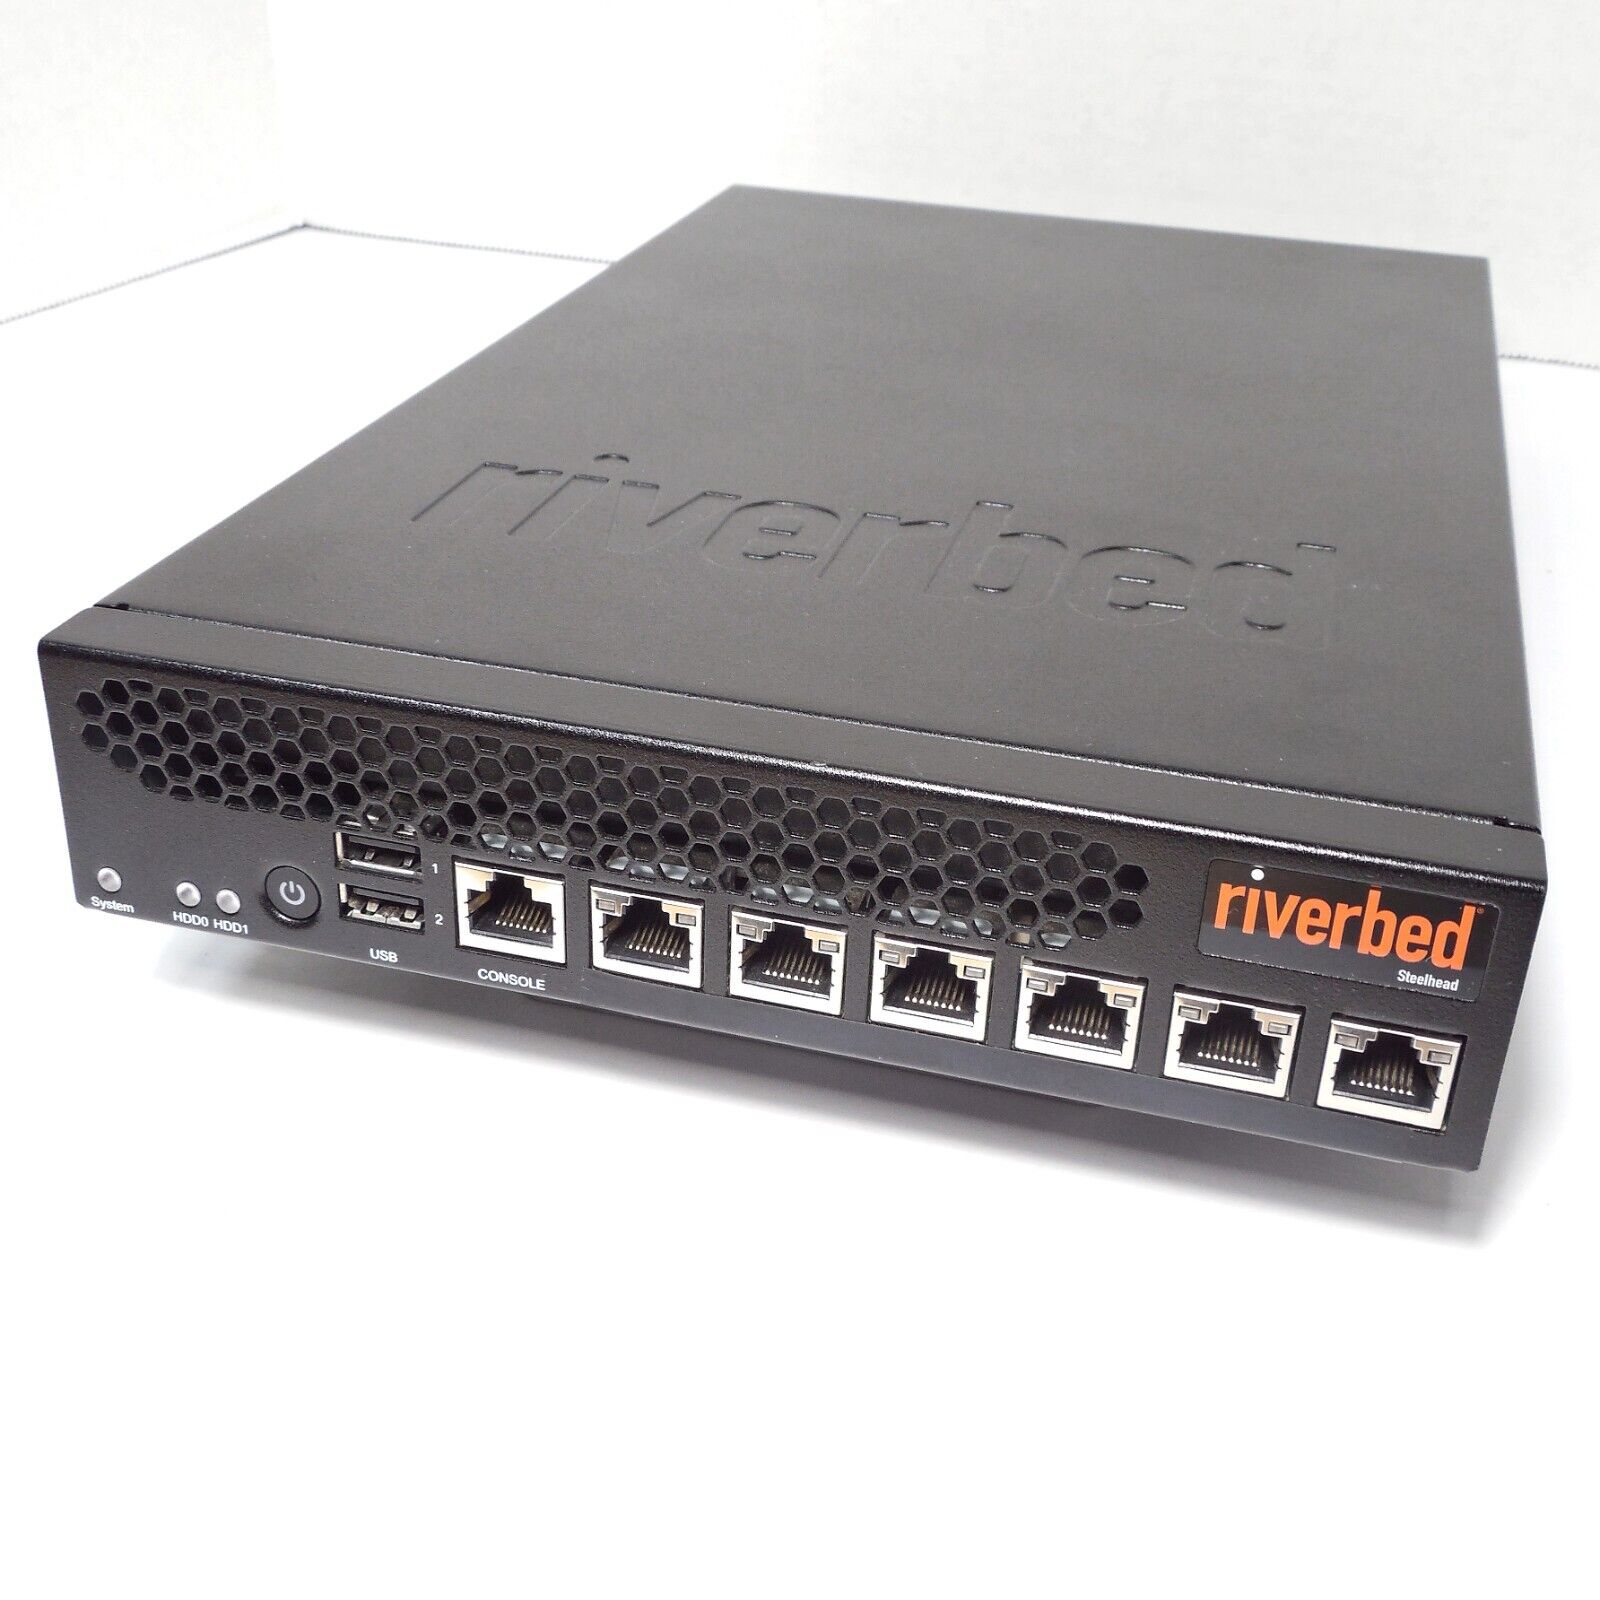 OPNsense Network Firewall Router Security Appliance (6) Intel Ethernet Ports